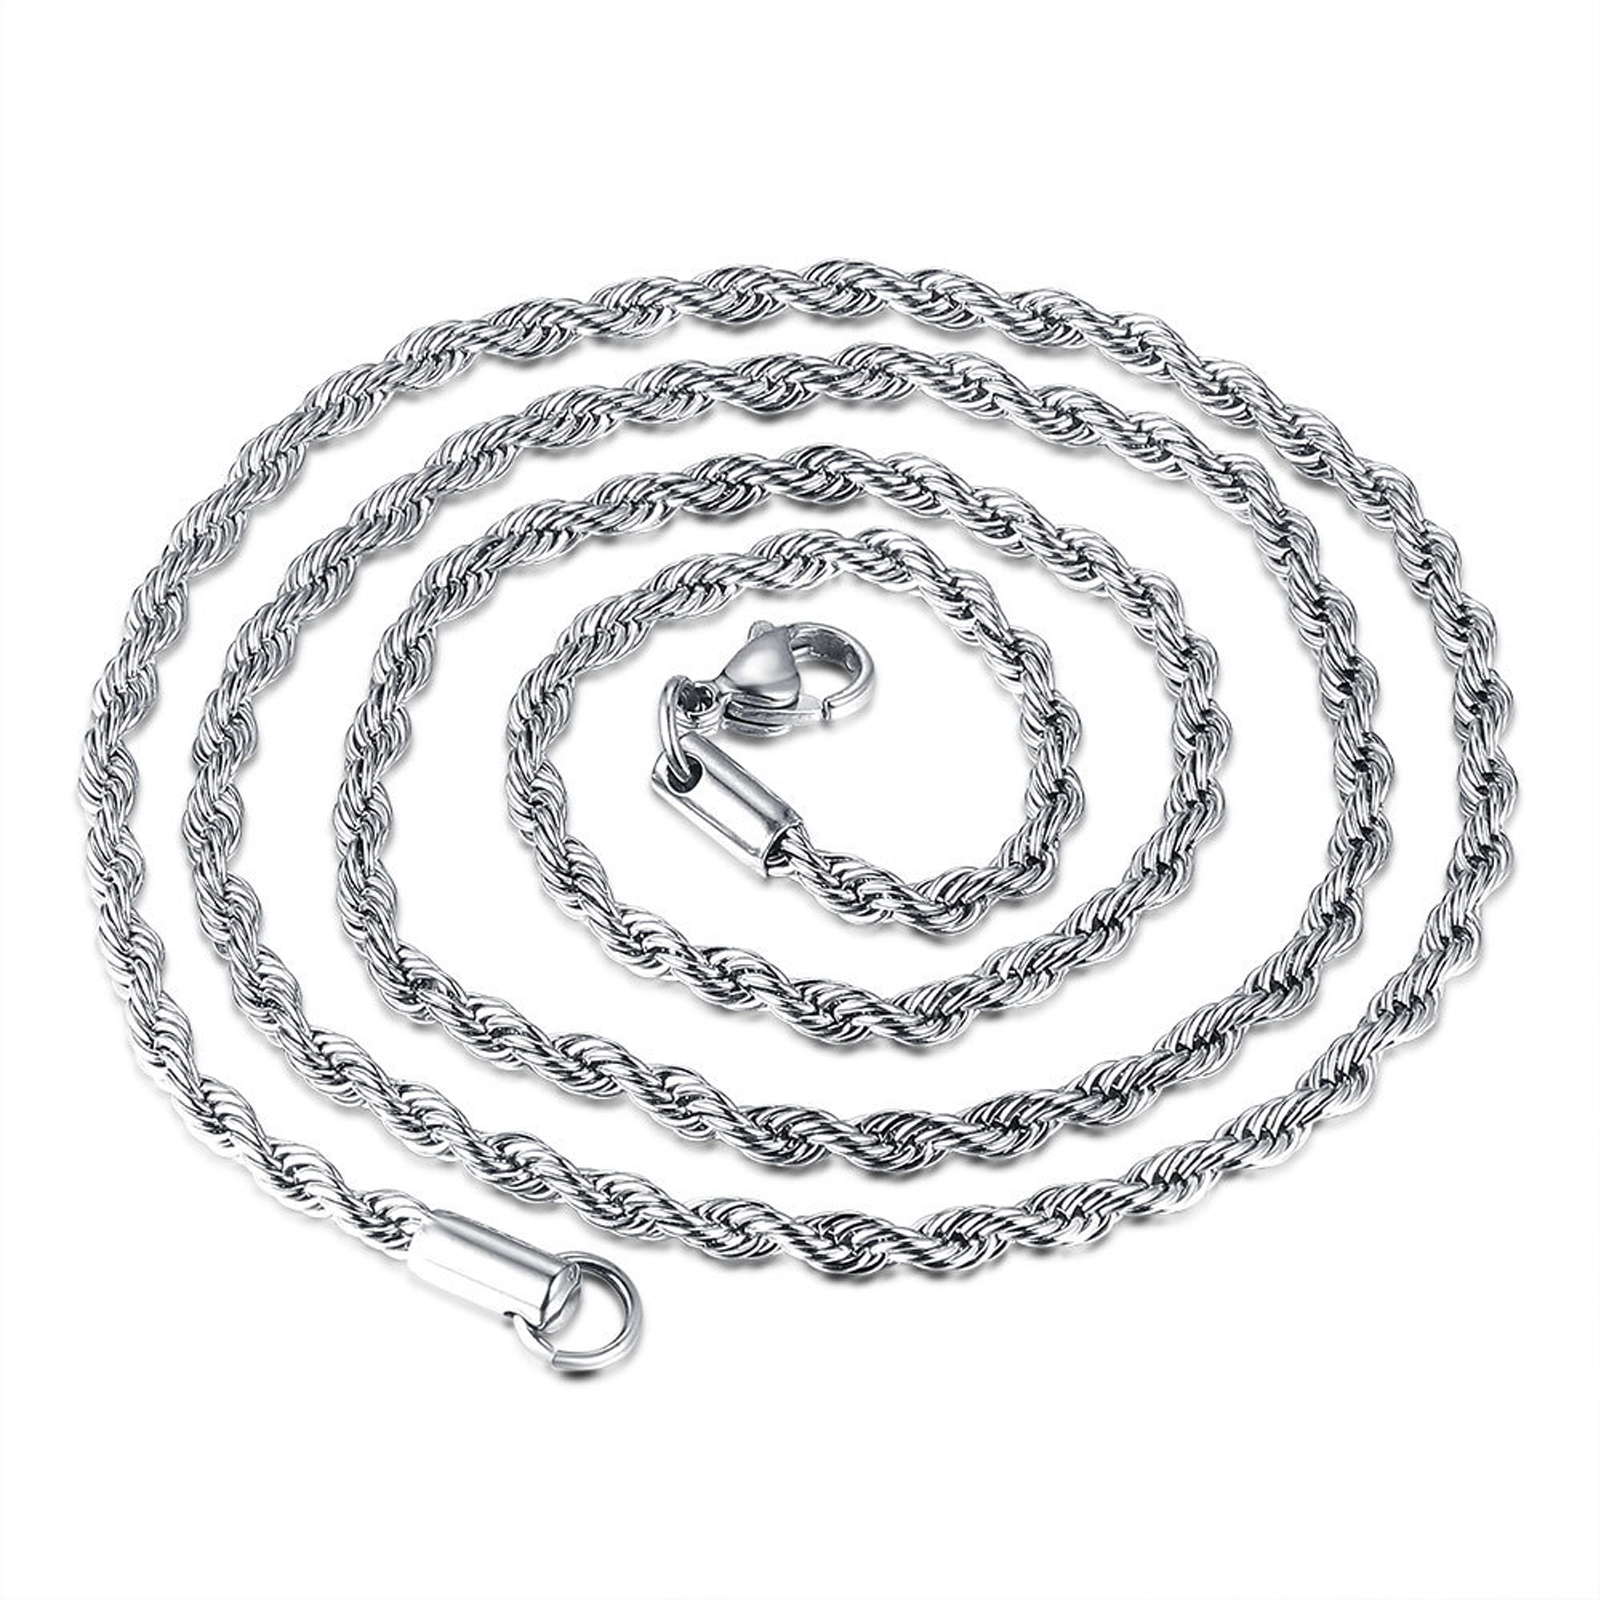 Picture of Stainless Steel Braided Rope Chain Necklace Silver Tone 41cm(16 1/8") long, 1 Piece